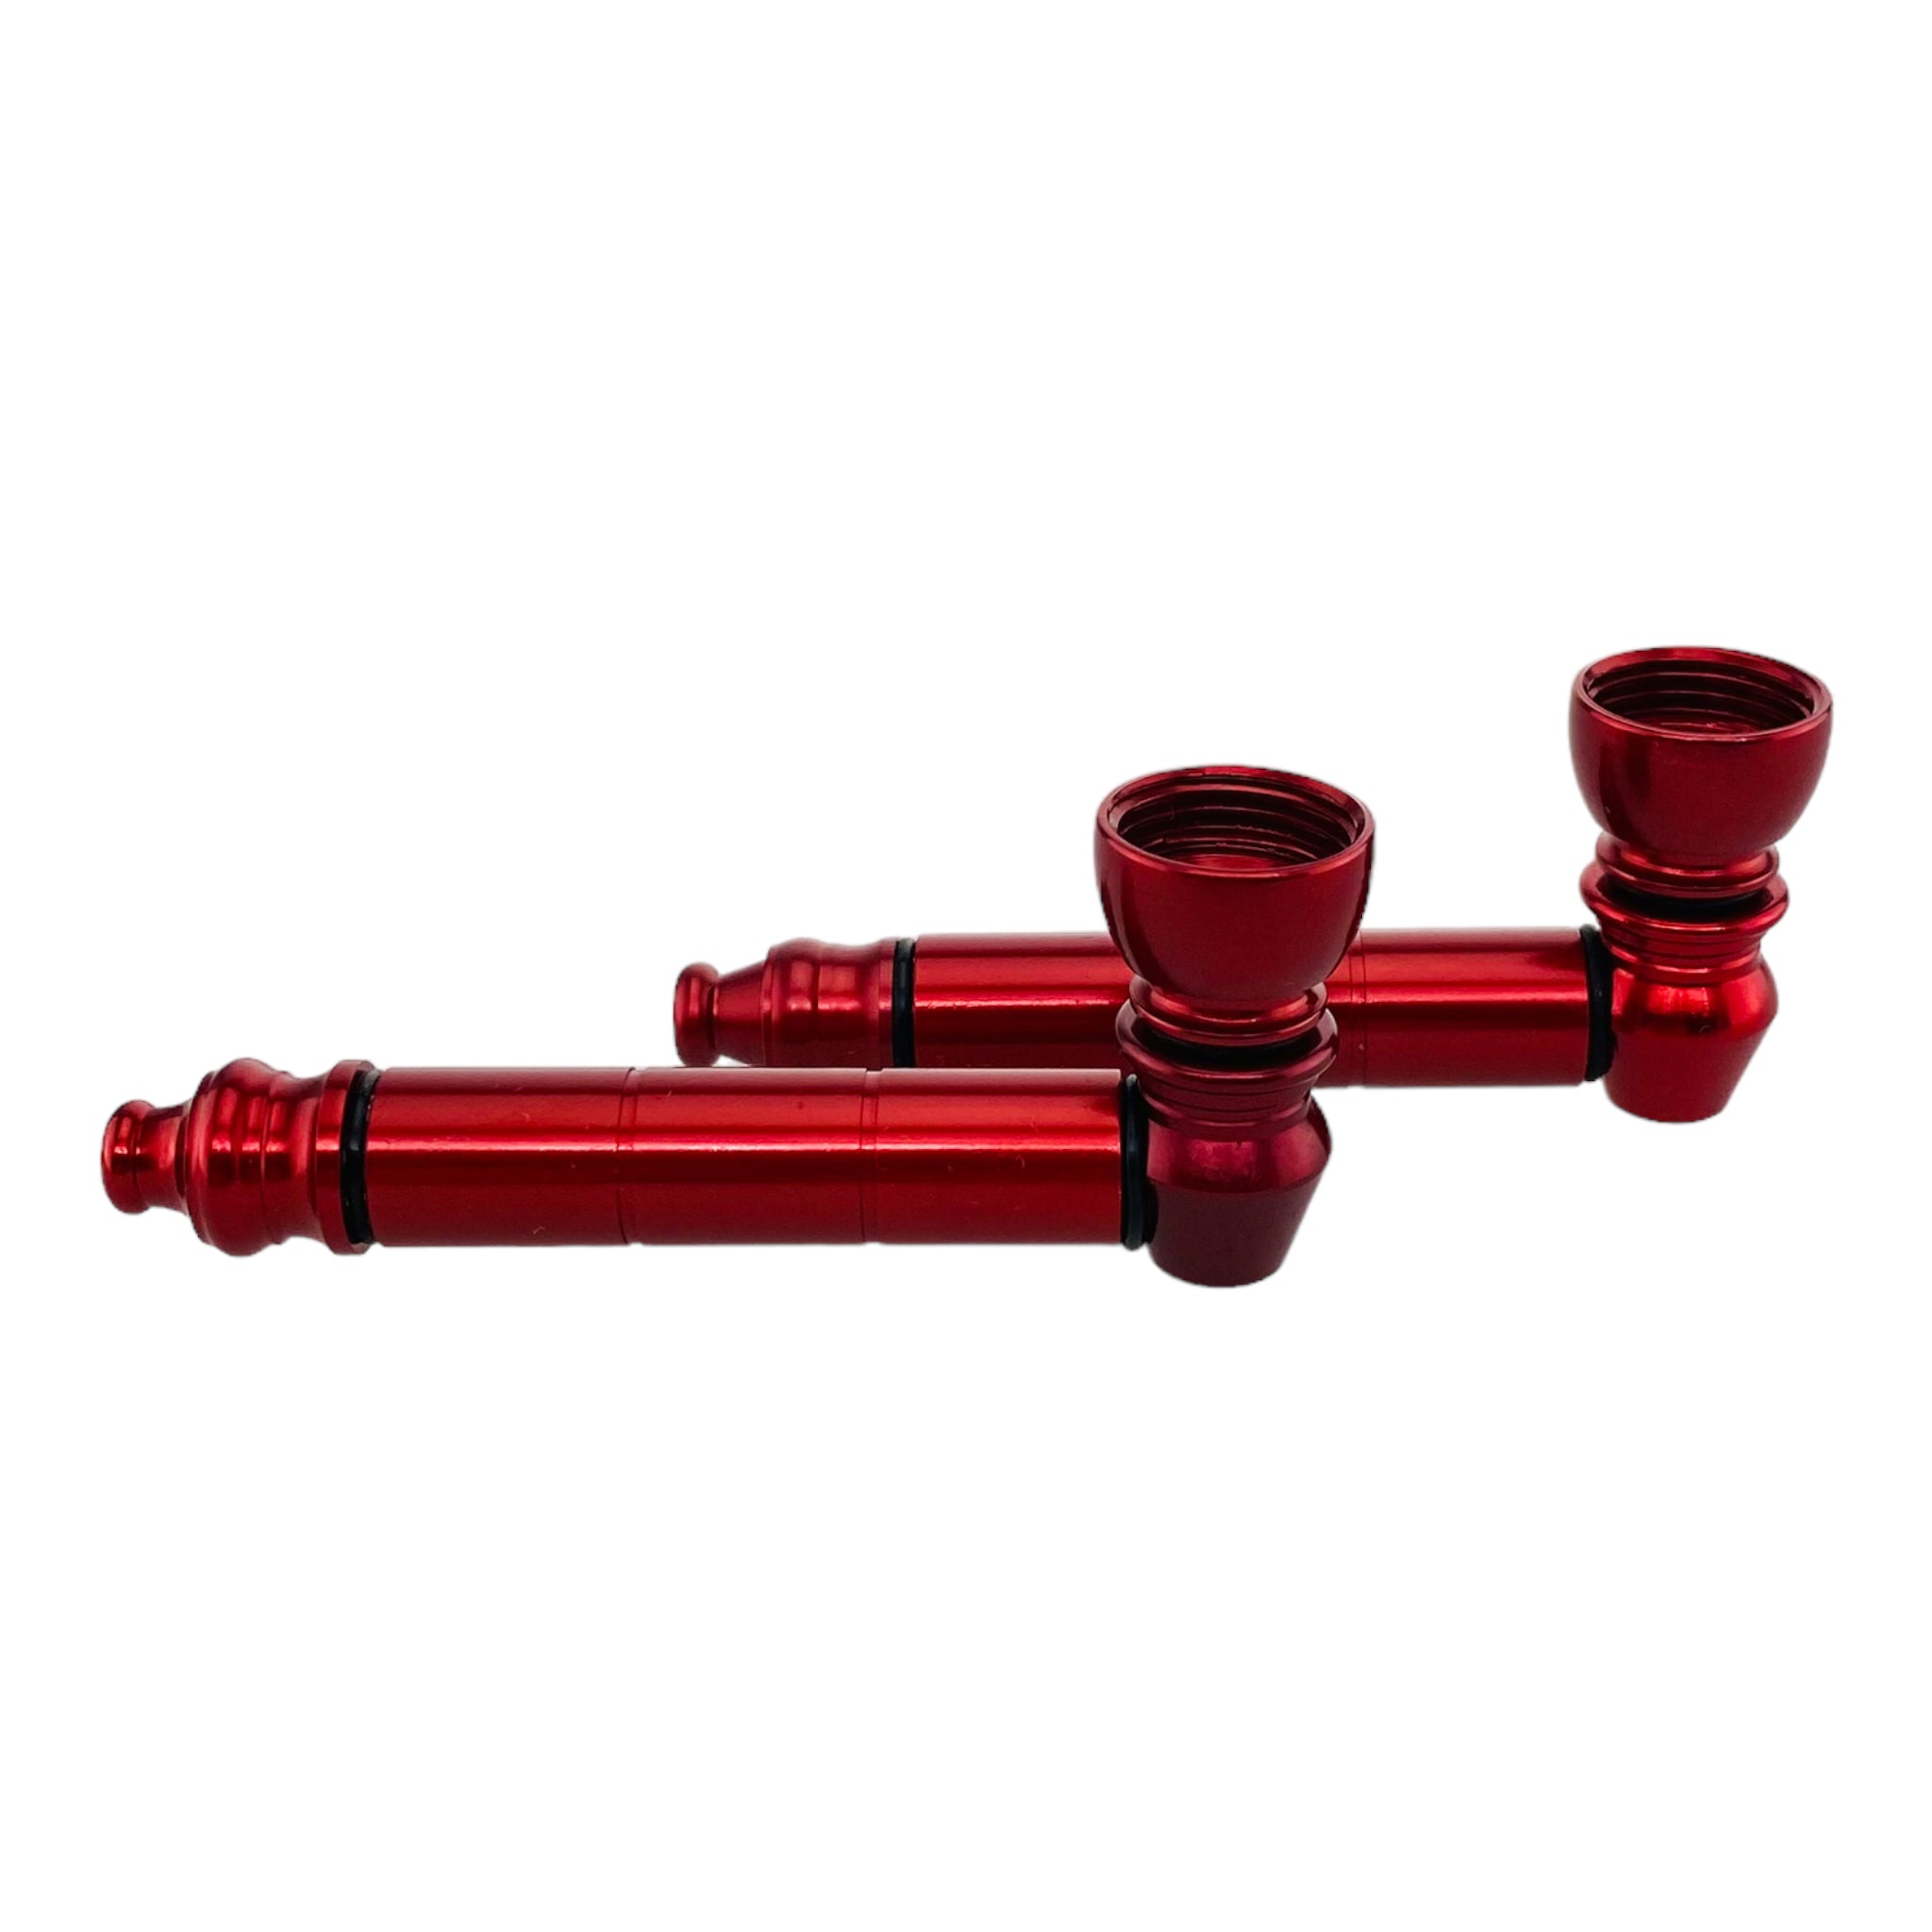 Red Basic Metal smoking Pipe With Small Chamber Bundle 2 Pipes And 10ct Screens